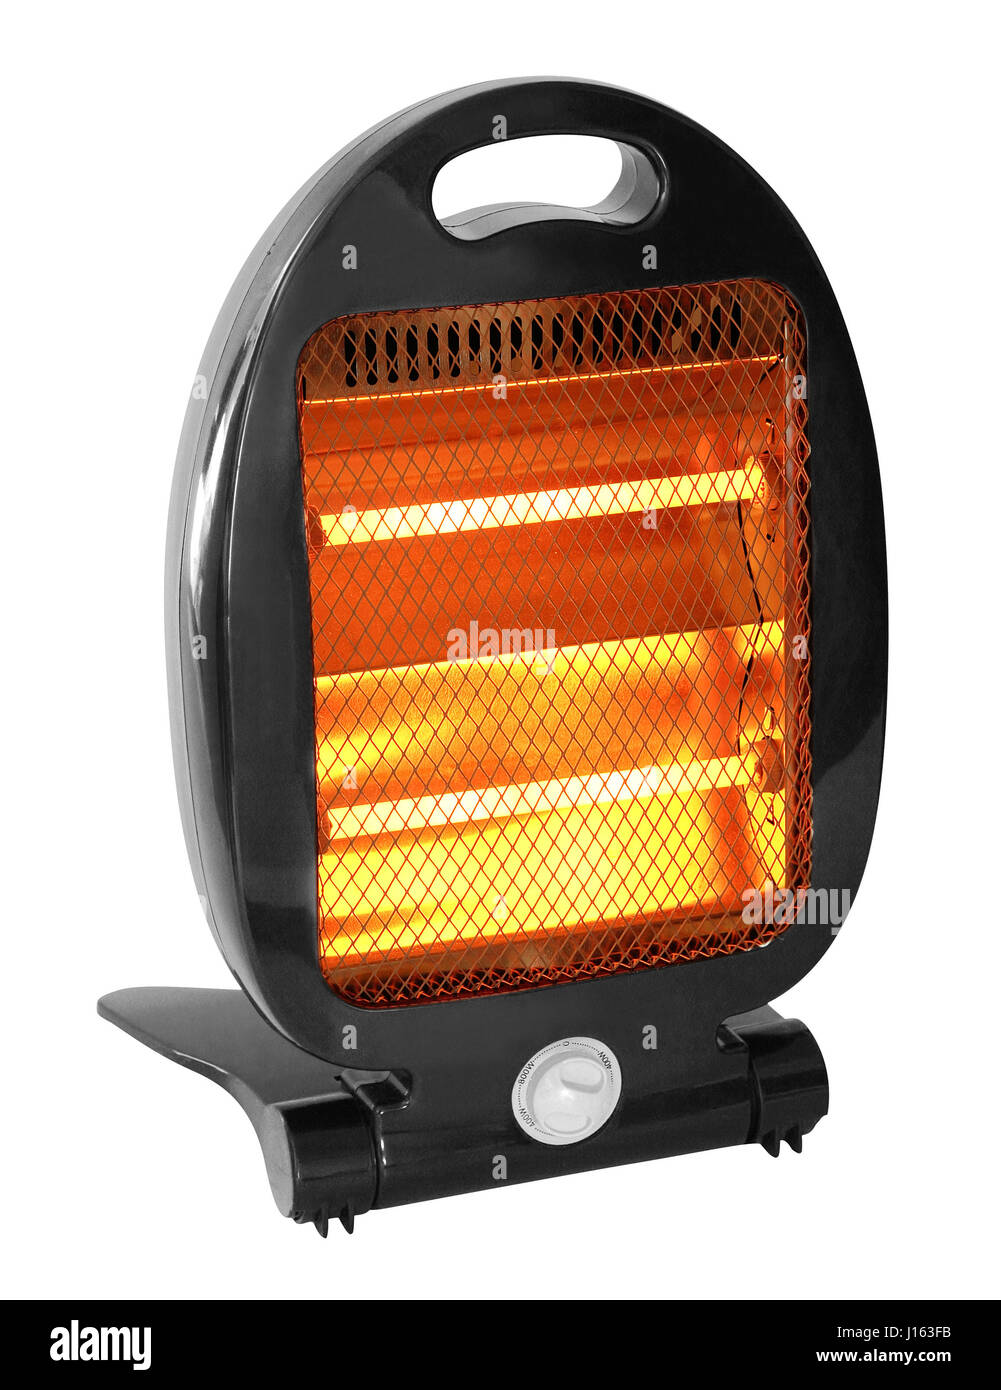 Quartz halogen heater with glowing bars. Isolated with clipping path. Stock Photo